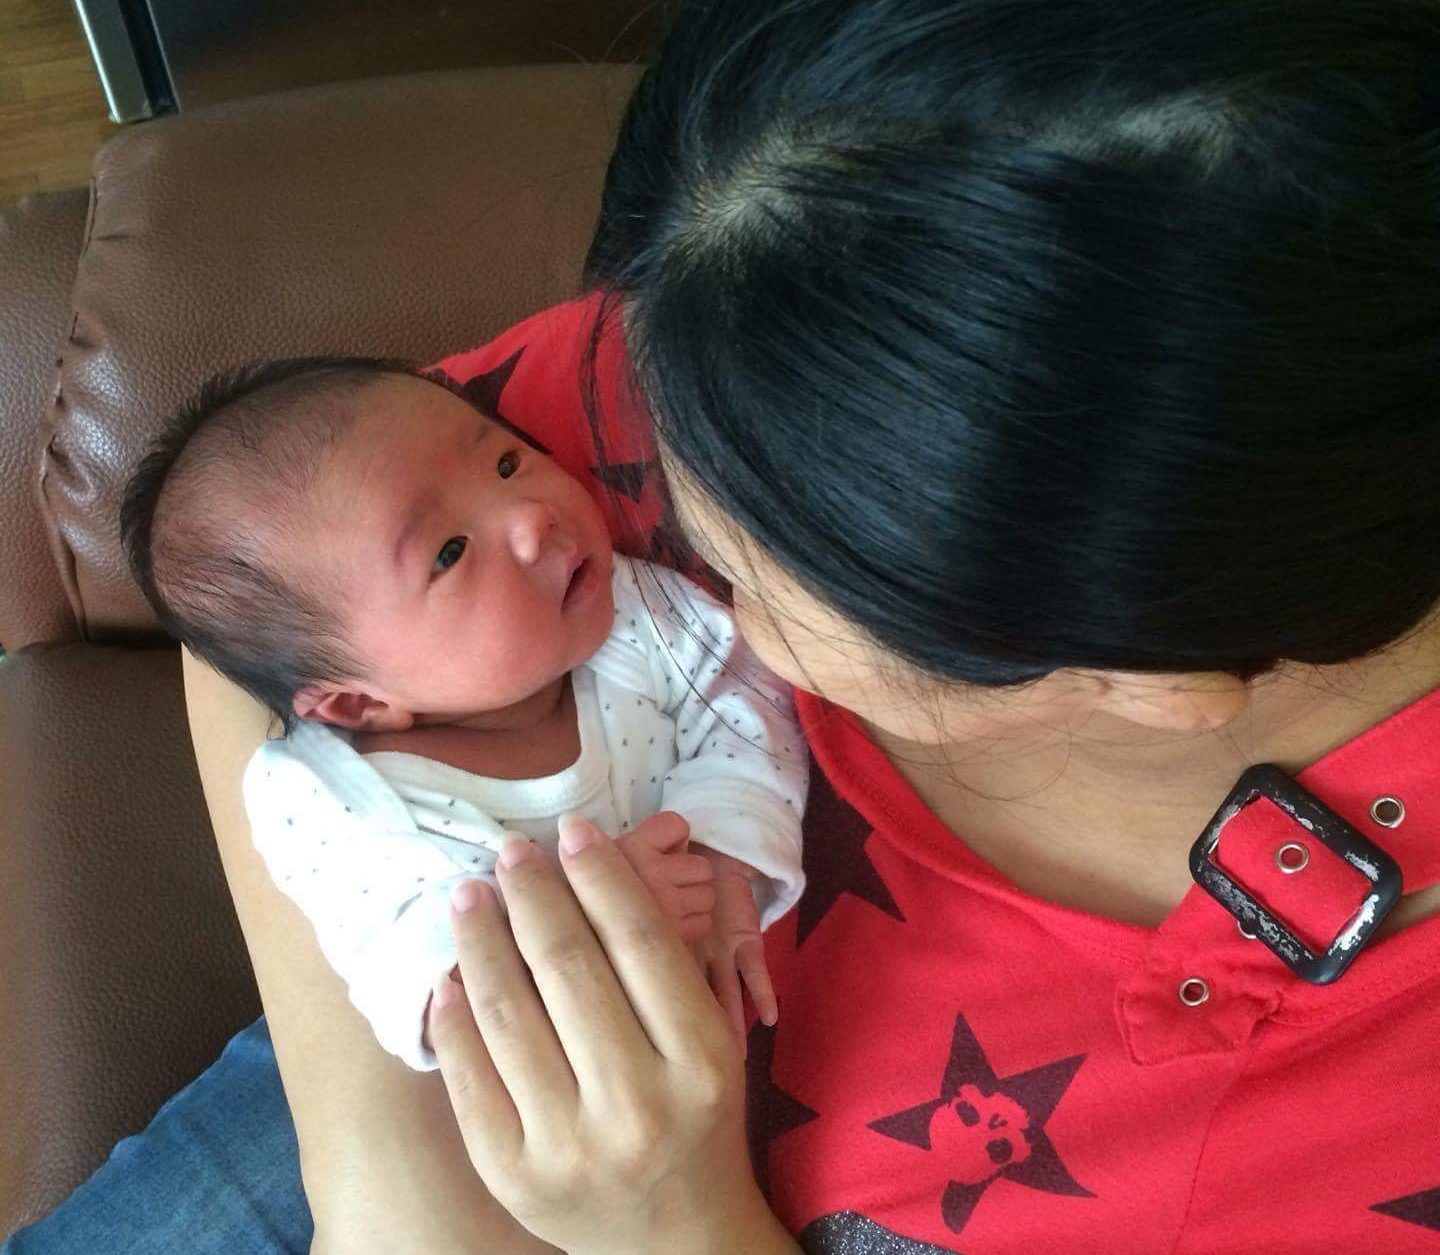 Last Month This Mom Decided To Keep Her Baby Instead of Abortion